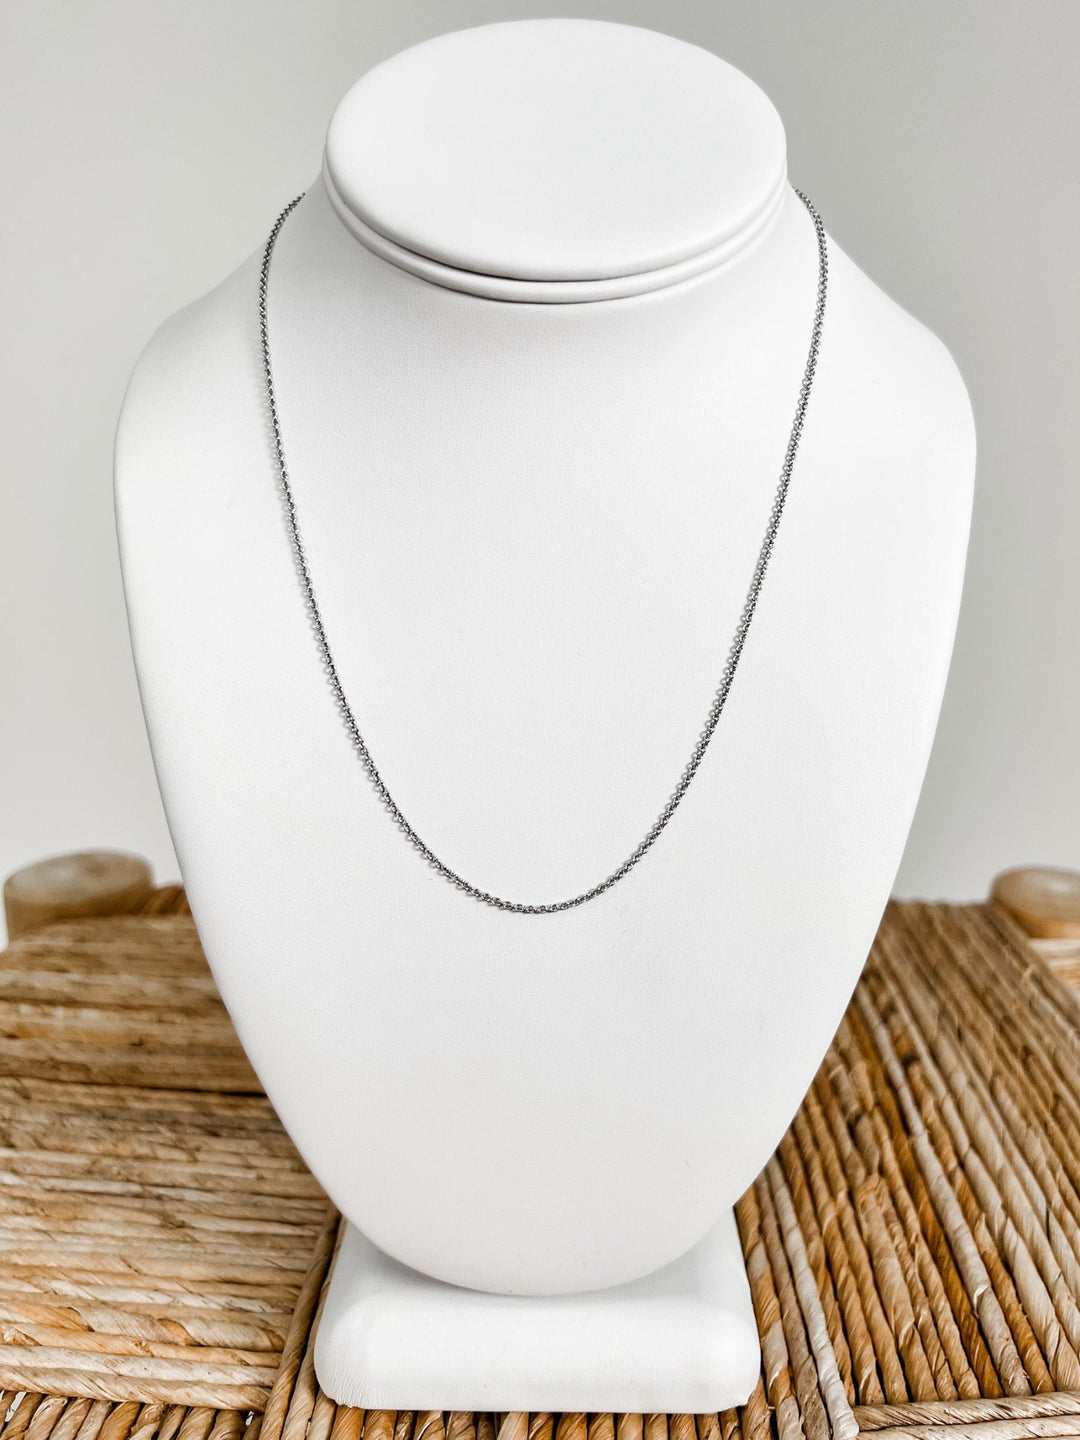 16" Skinny Cable Chain Necklace, Silver